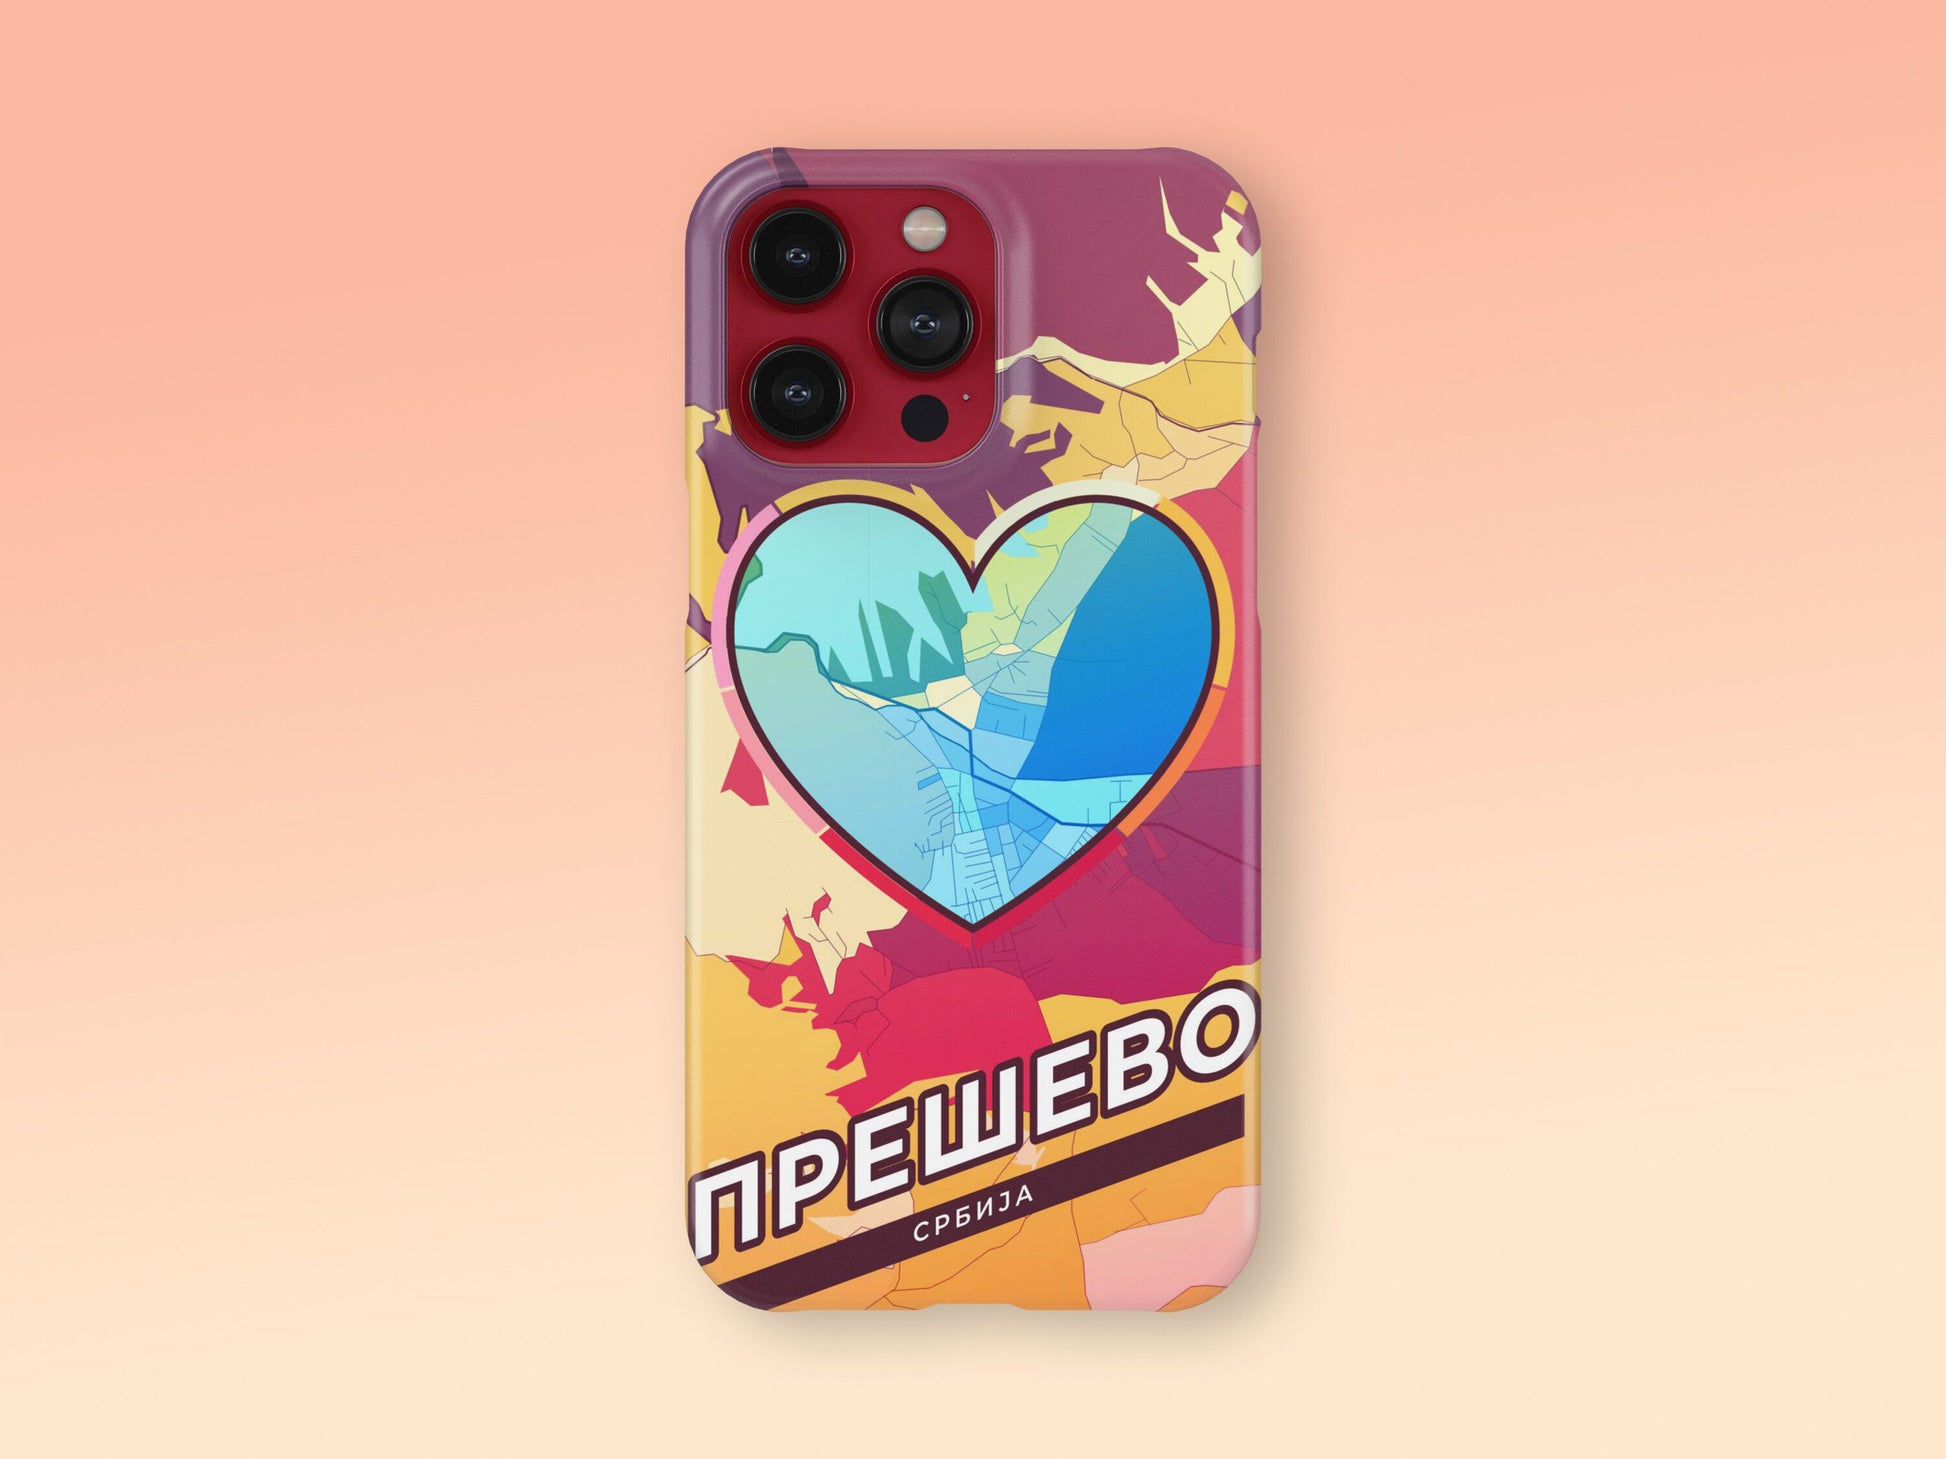 Preševo Serbia slim phone case with colorful icon. Birthday, wedding or housewarming gift. Couple match cases. 2